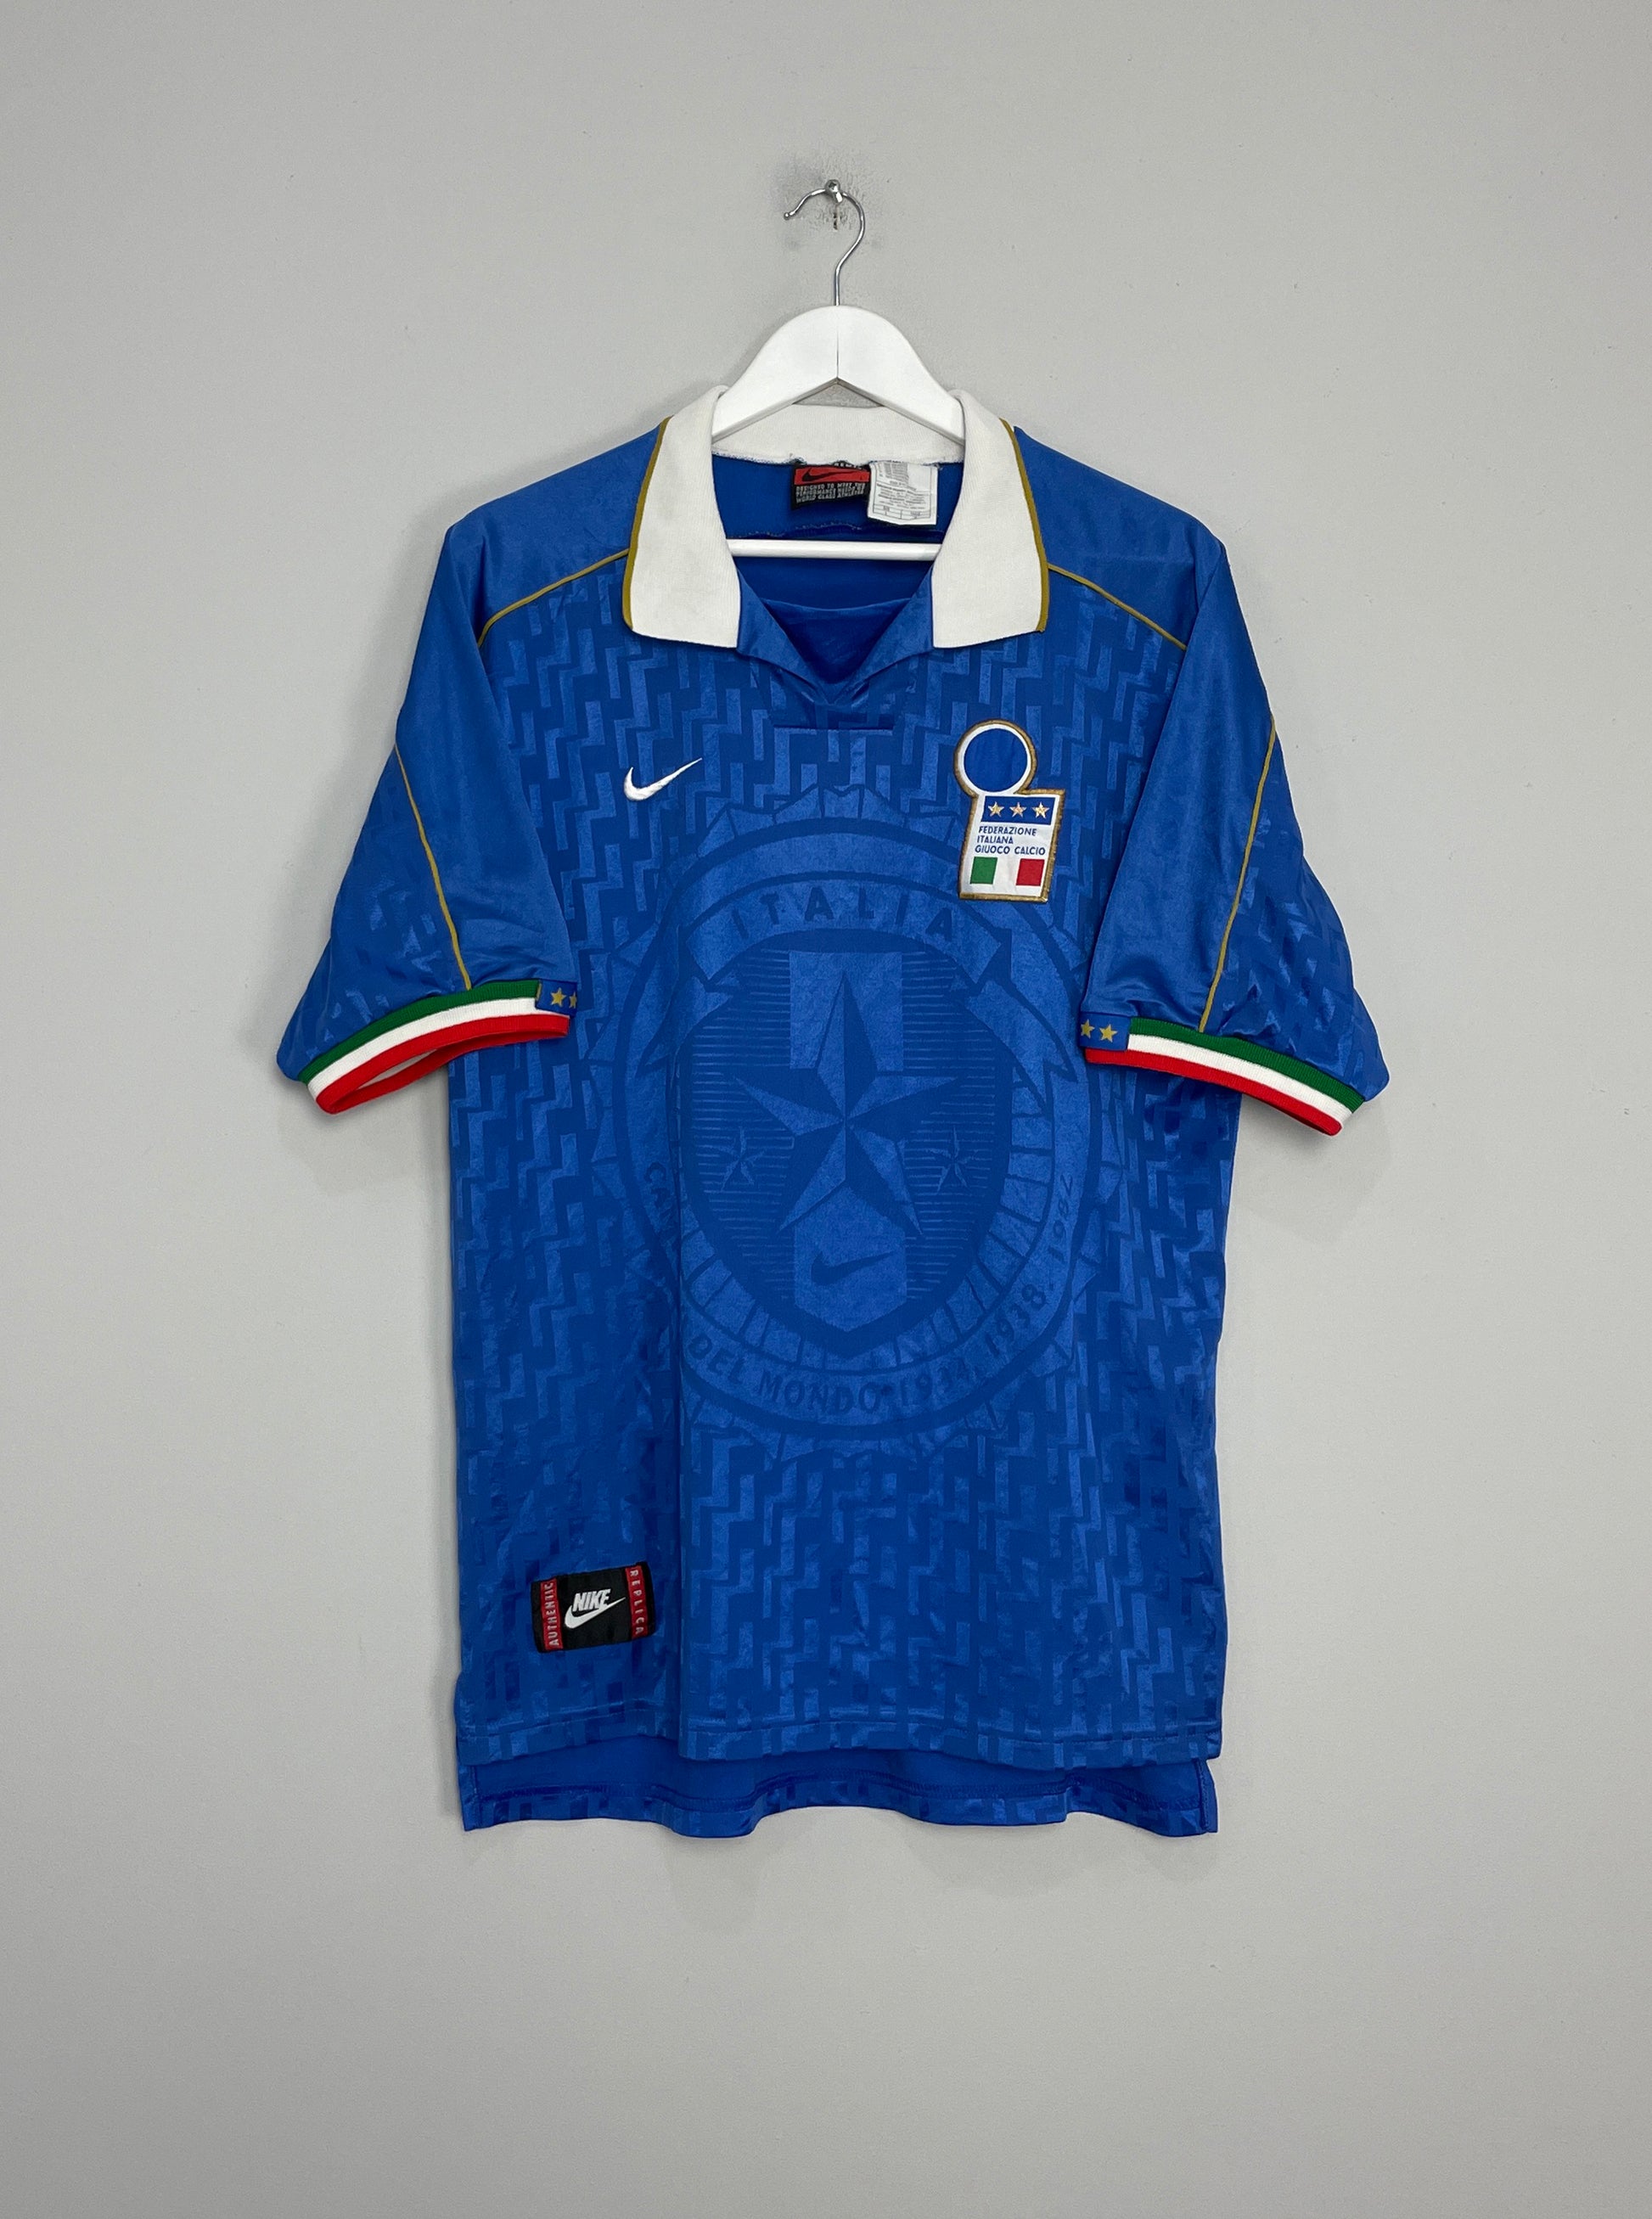 Image of the Italy shirt from the 1995/96 season